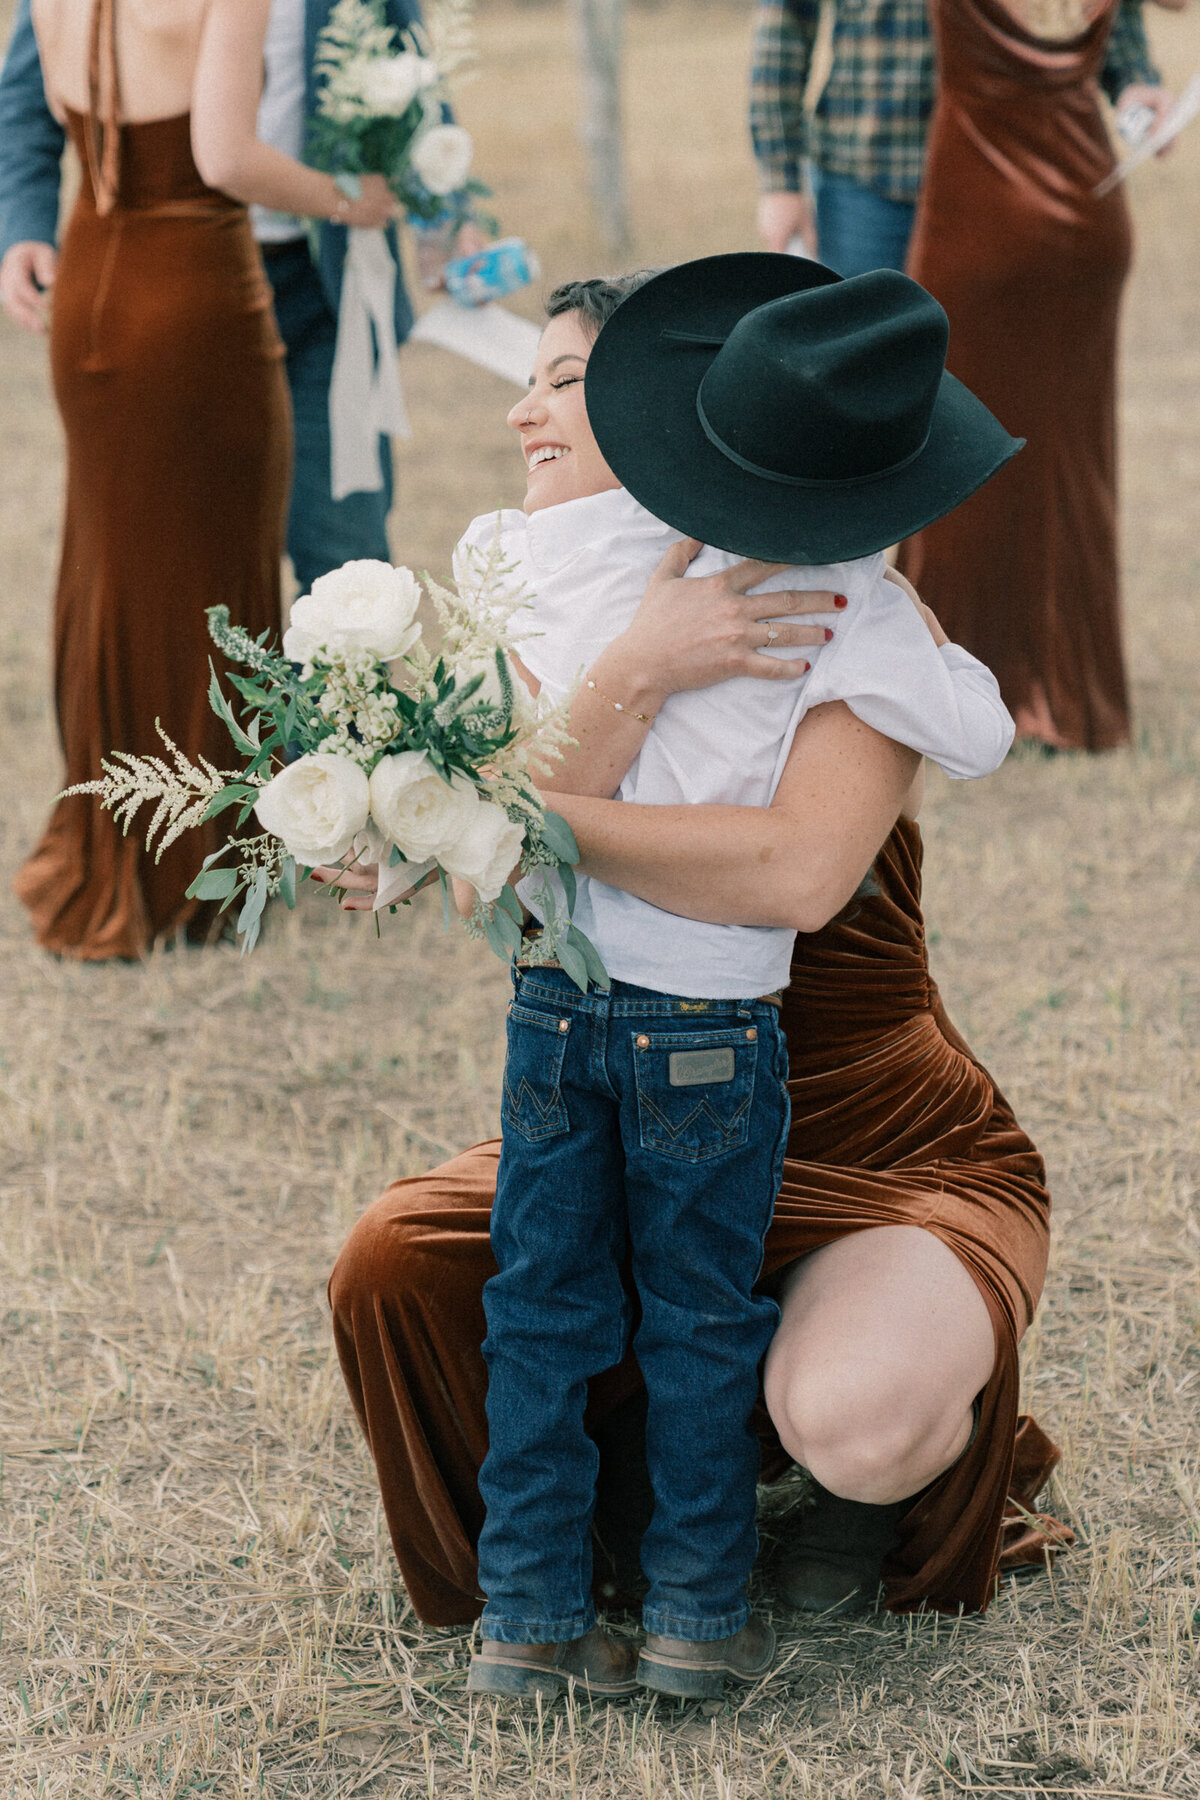 Steamboat_Springs_Ranch_wedding_Mary_Ann_craddock_photography_0029